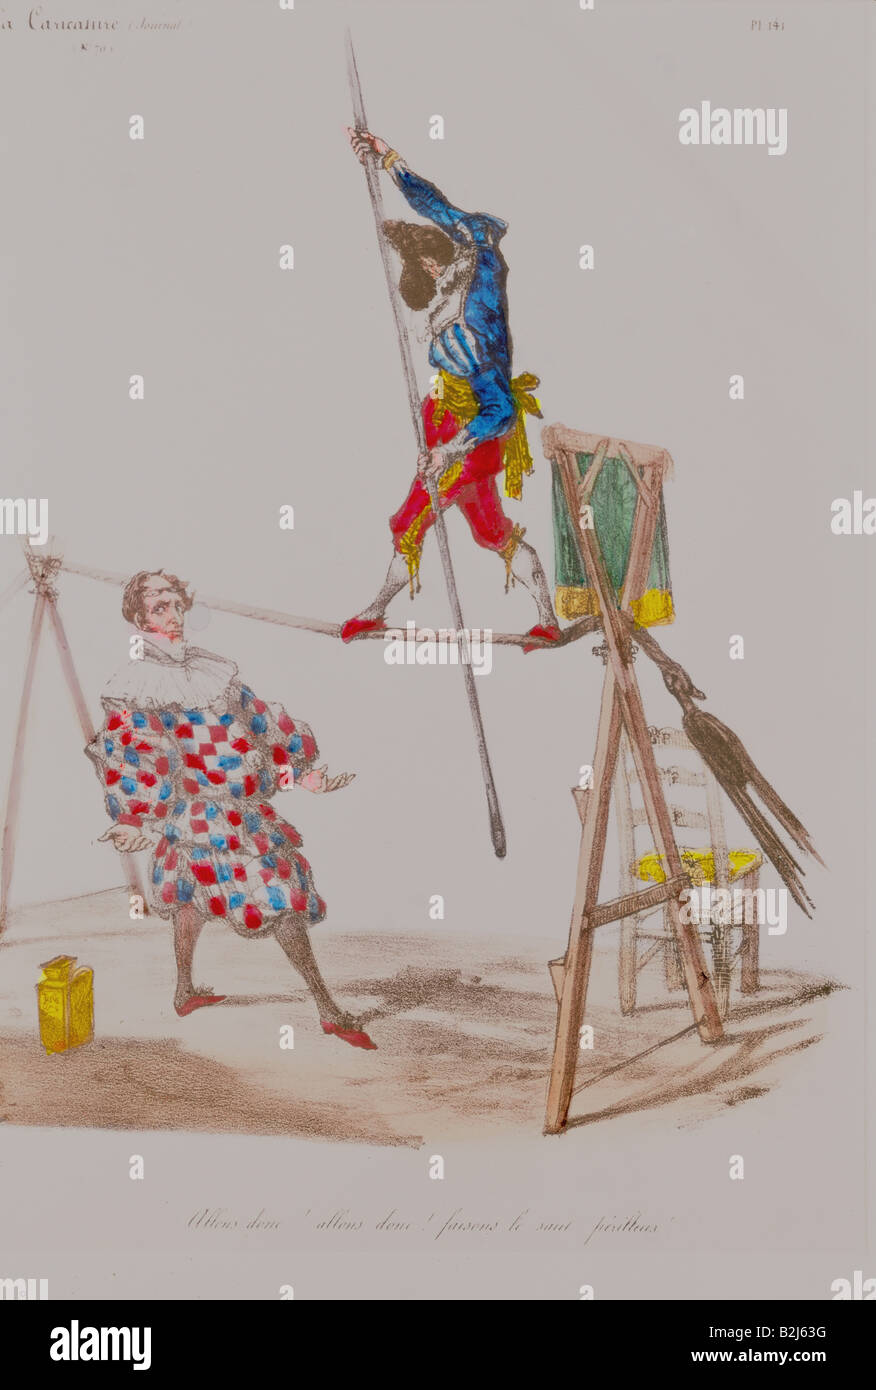 Louis Philippe, 6.10.1773 - 26. 8.1850, King of France 7.8.1830 - 24.2.1848, caricature, with foreign minister Francois Guizot as tightrope walker, 'Allons donc faisons le saut perillaux', lithograph, France, circa 1840, private collection, , Stock Photo